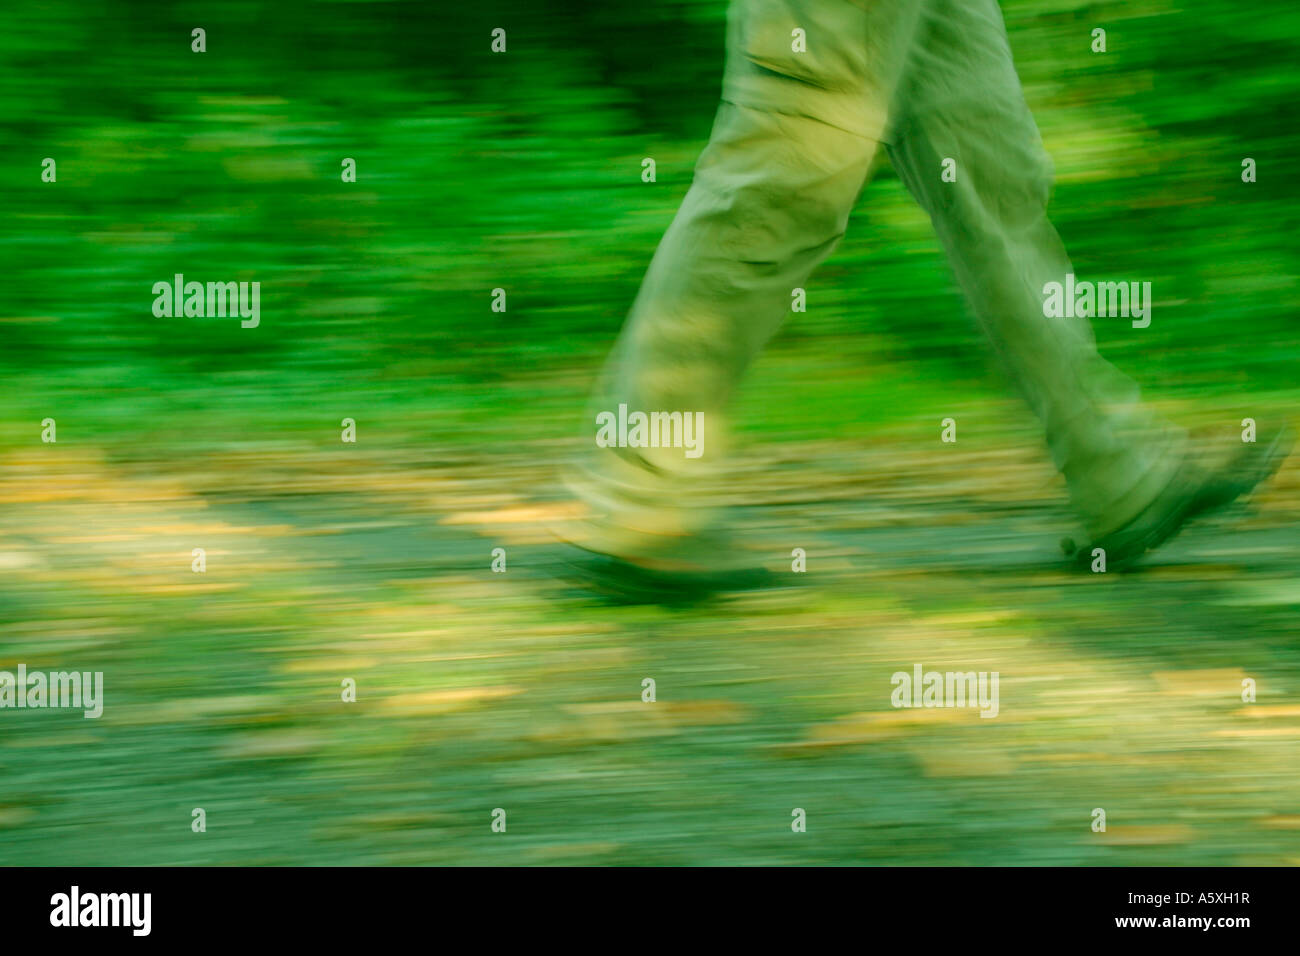 Man walking low section blurred motion Stock Photo